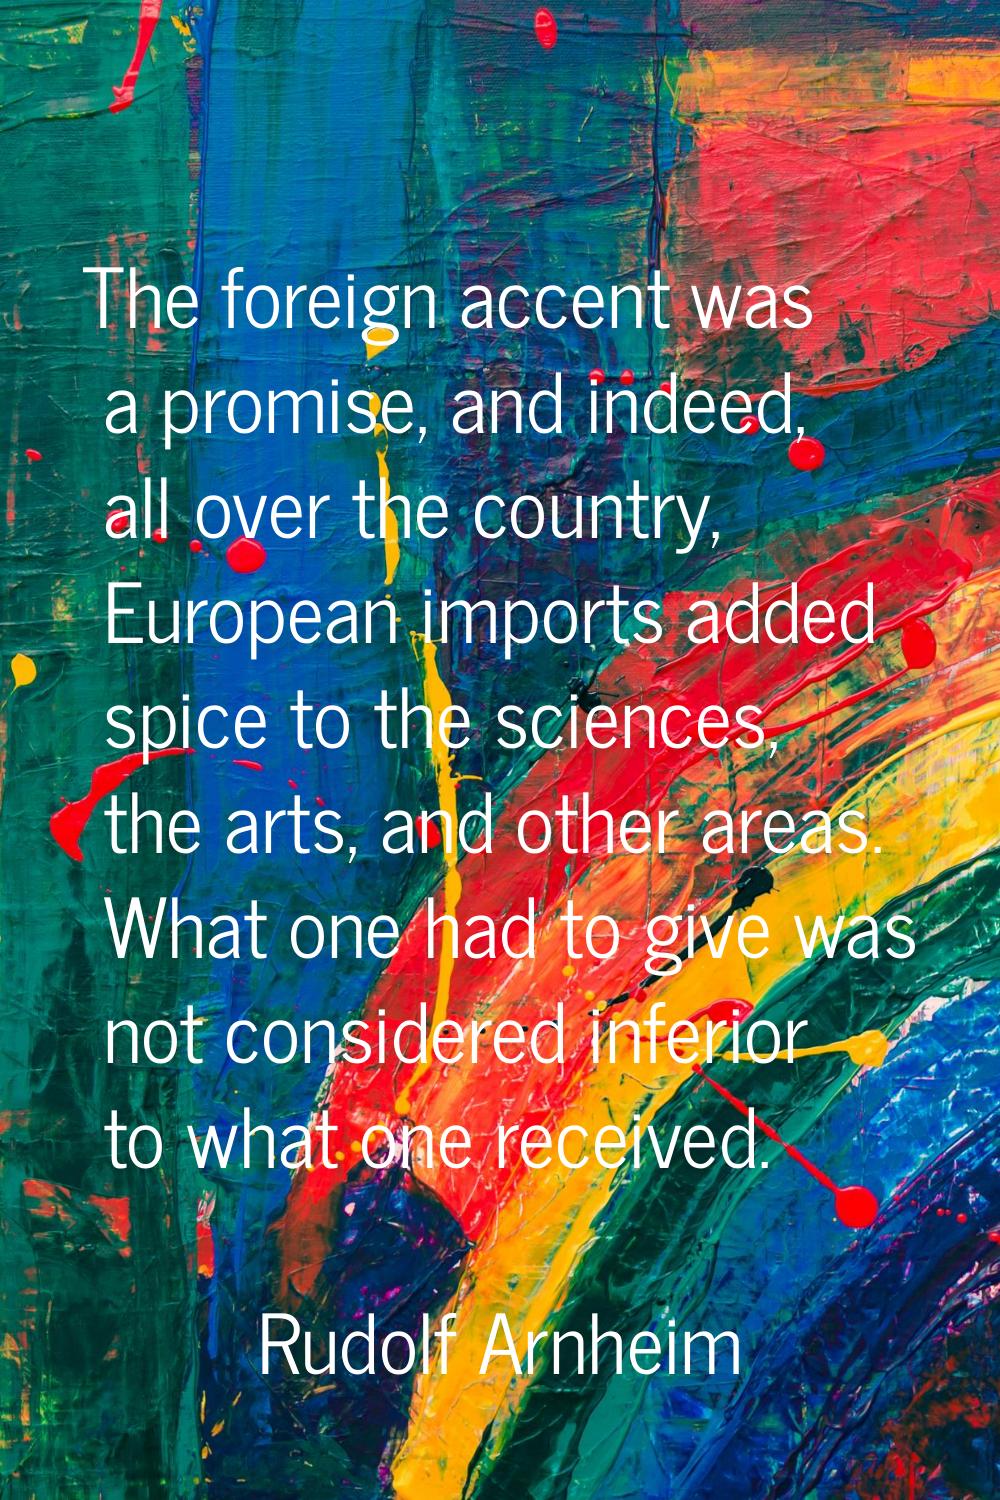 The foreign accent was a promise, and indeed, all over the country, European imports added spice to